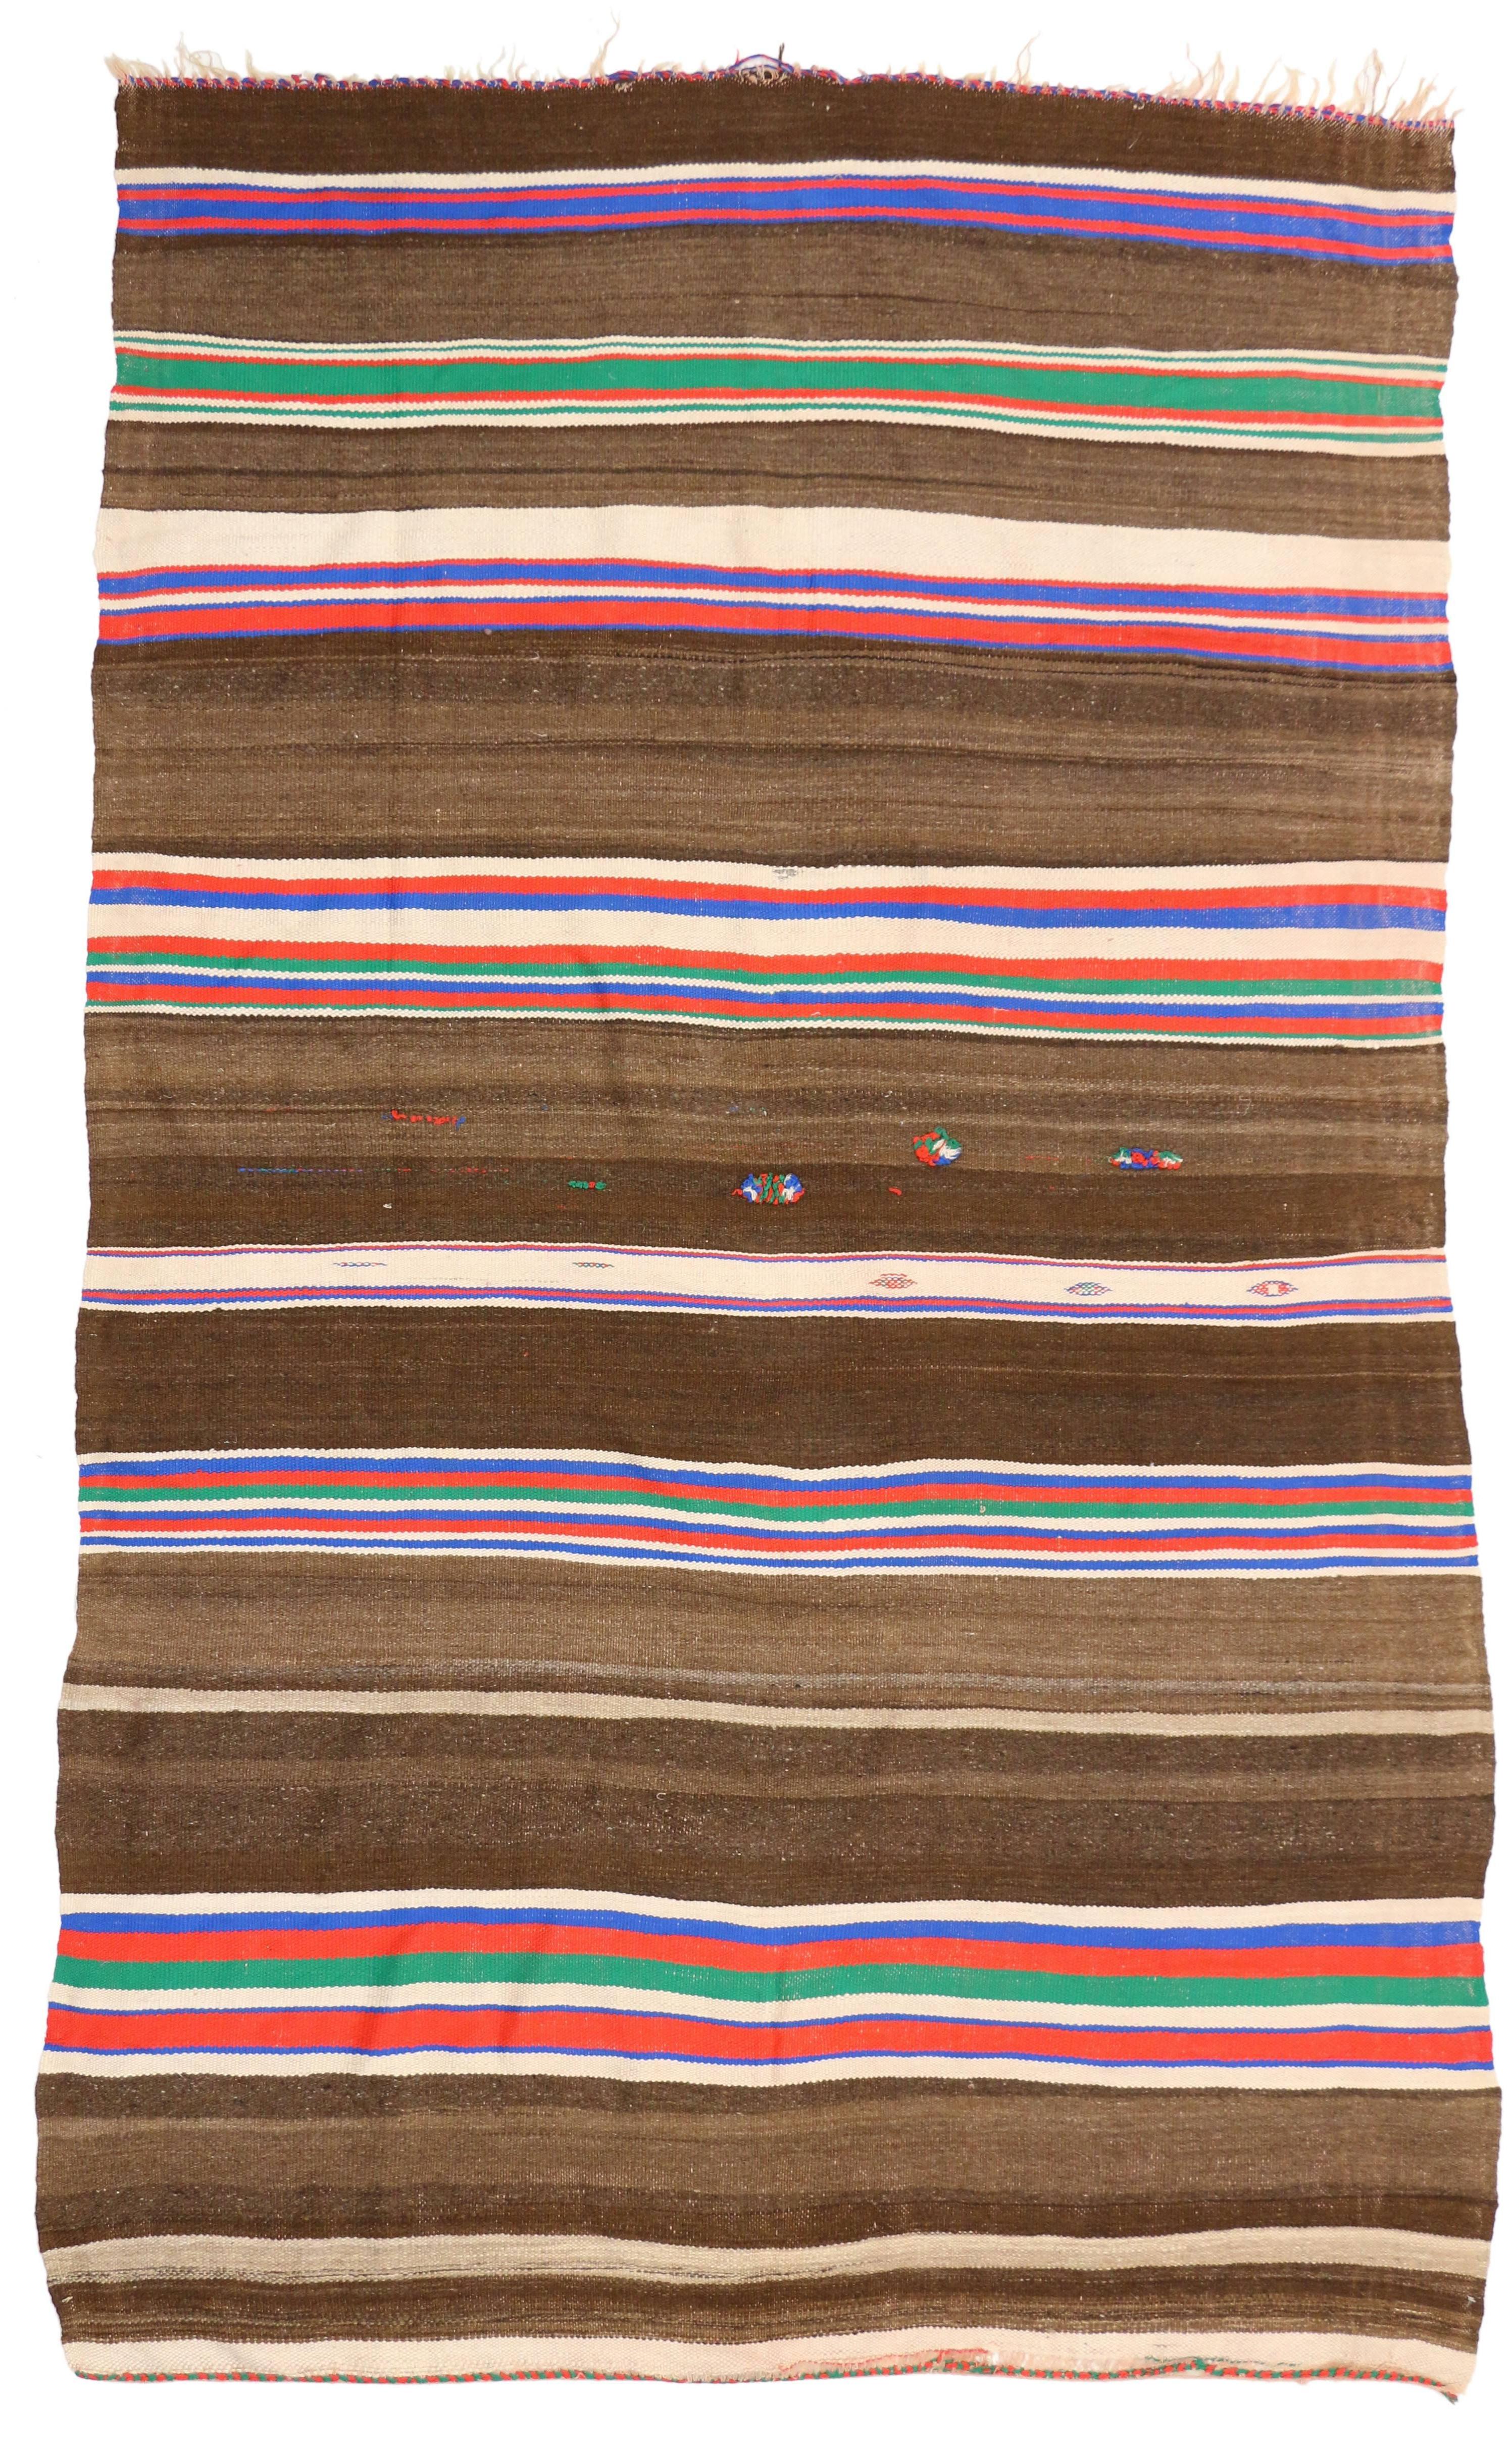 20550 Vintage Berber Striped Moroccan Kilim Rug with Tribal Style 06'02 x 10'05. With its lively colors and rugged beauty, this hand-woven wool vintage Berber Moroccan striped kilim rug manages to meld contemporary, modern, and traditional design